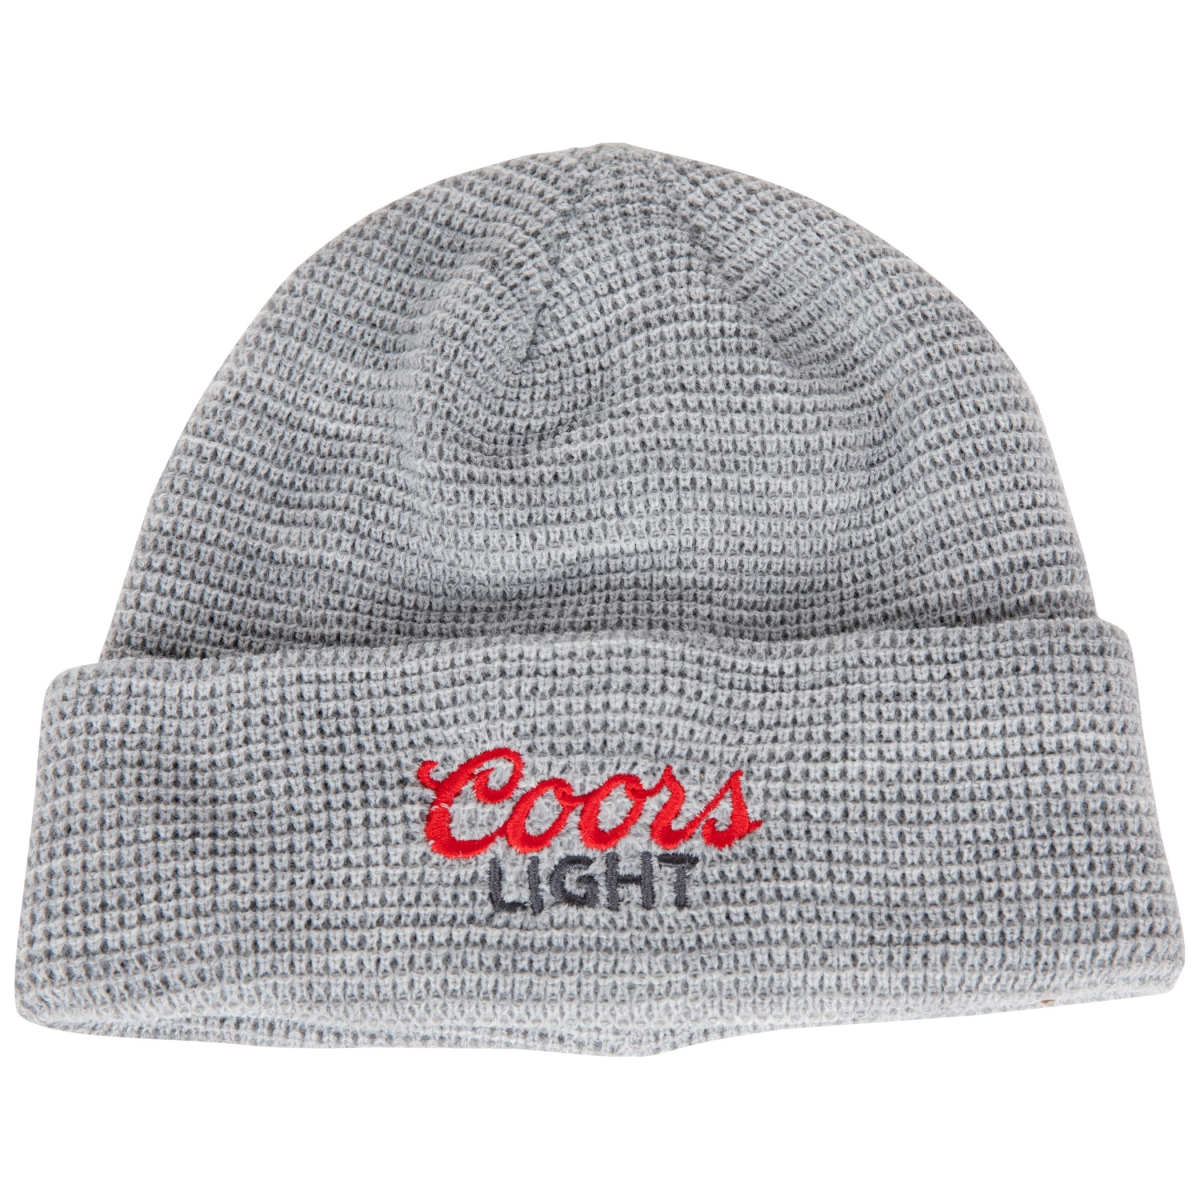 Picture of Coors 830455 Lite Text Knit Cuff Beanie